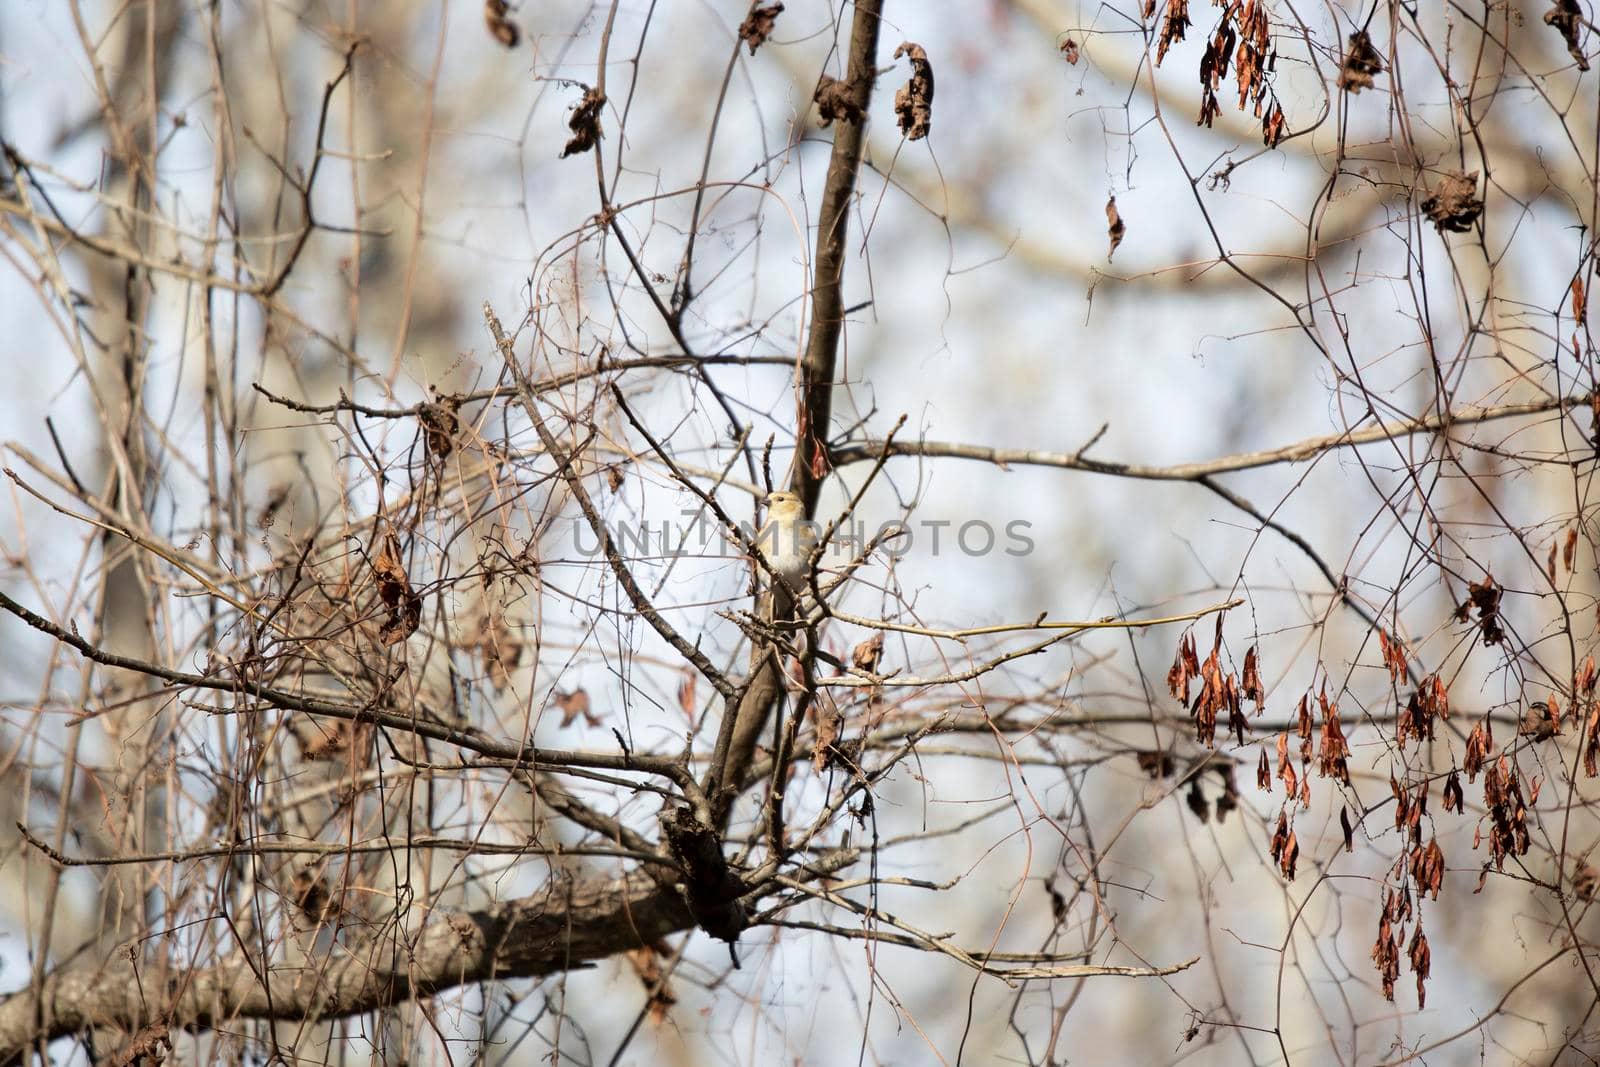 American goldfinch (Spinus tristis) perched on a tree